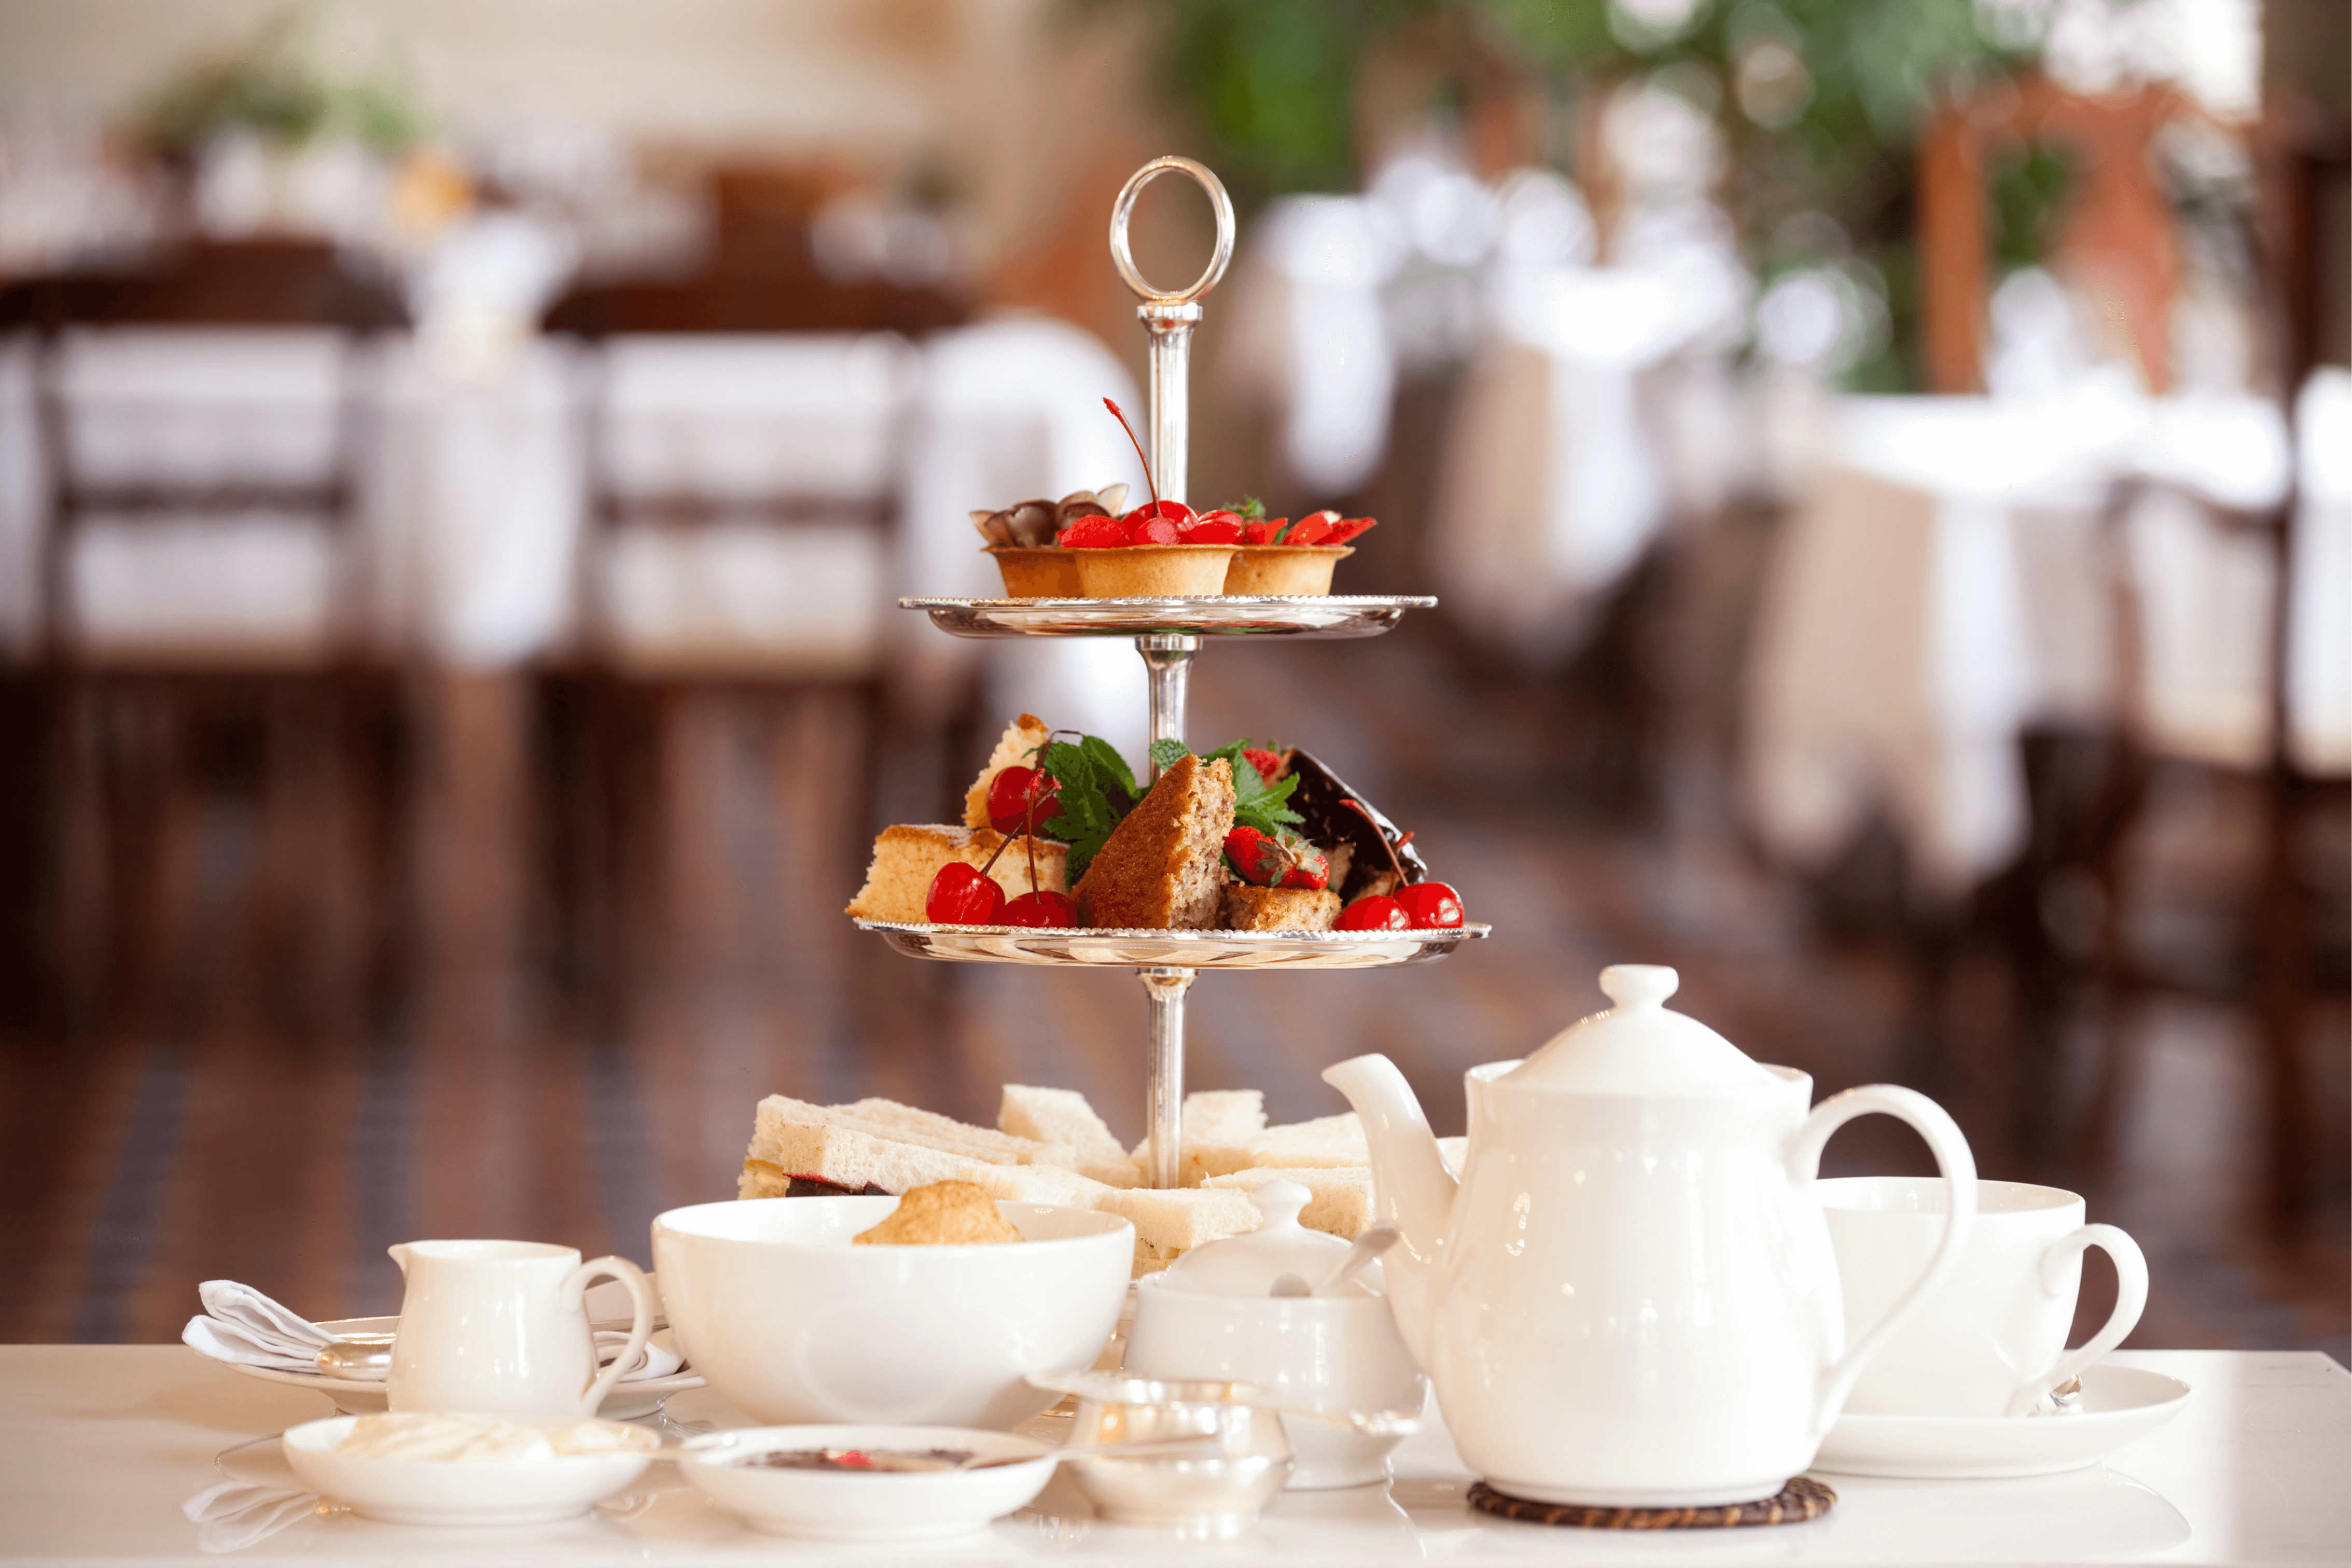 8 Spots for the Best Afternoon Tea in Southampton